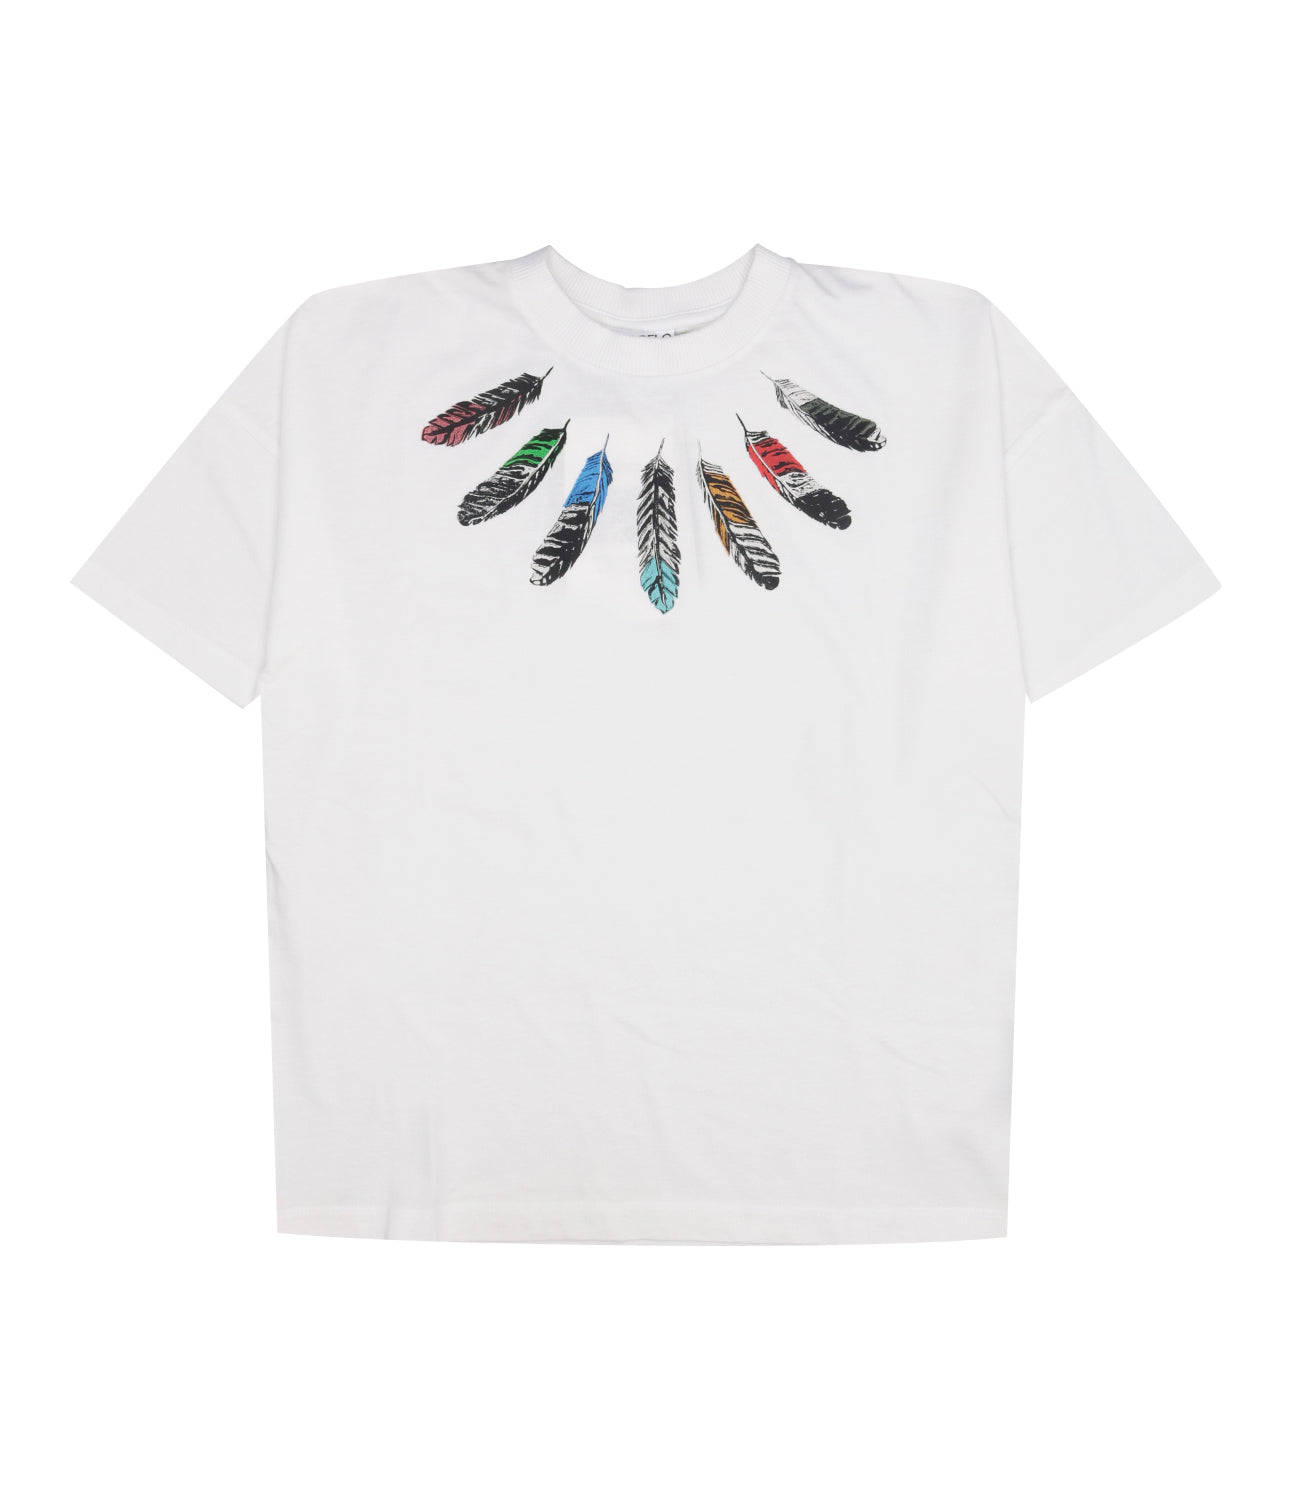 Marcelo Burlon Kids | T-Shirt Collar Feathers White and Grey